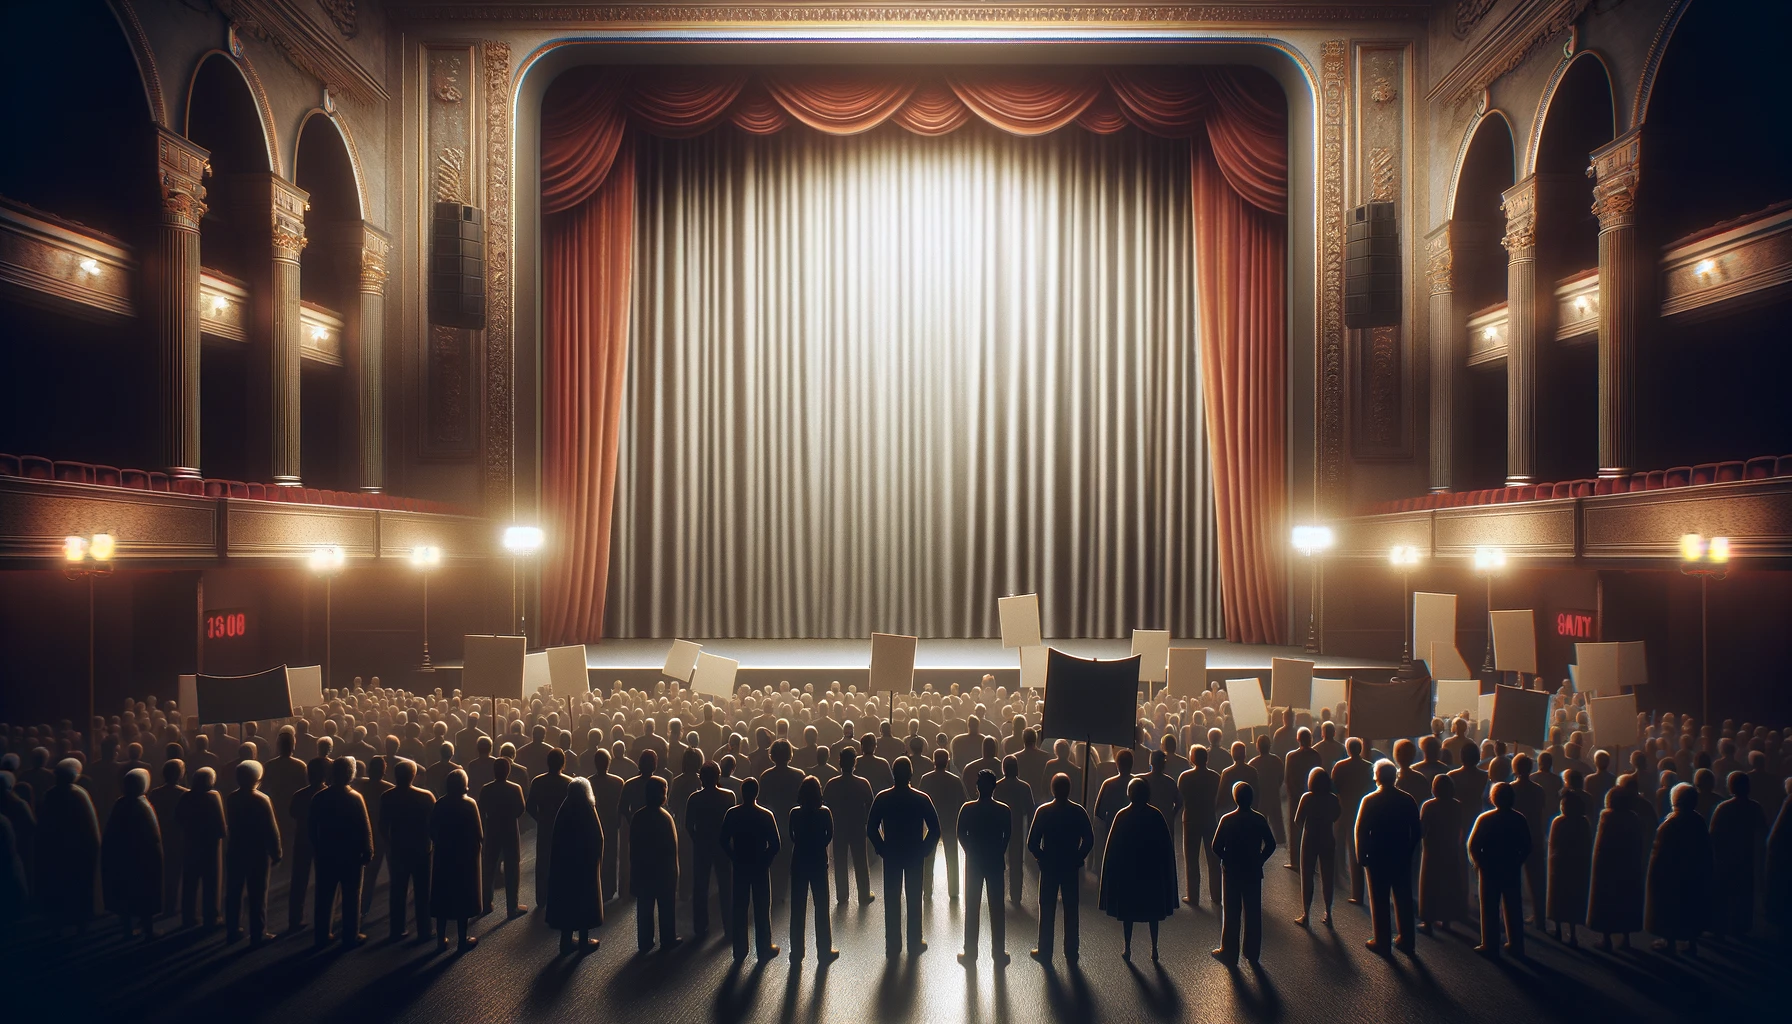 A-realistic-image-of-the-interior-of-a-theater-in-16_9-format.-The-view-is-from-the-stage-showing-a-closed-curtain-in-the-background.-In-front-of-the